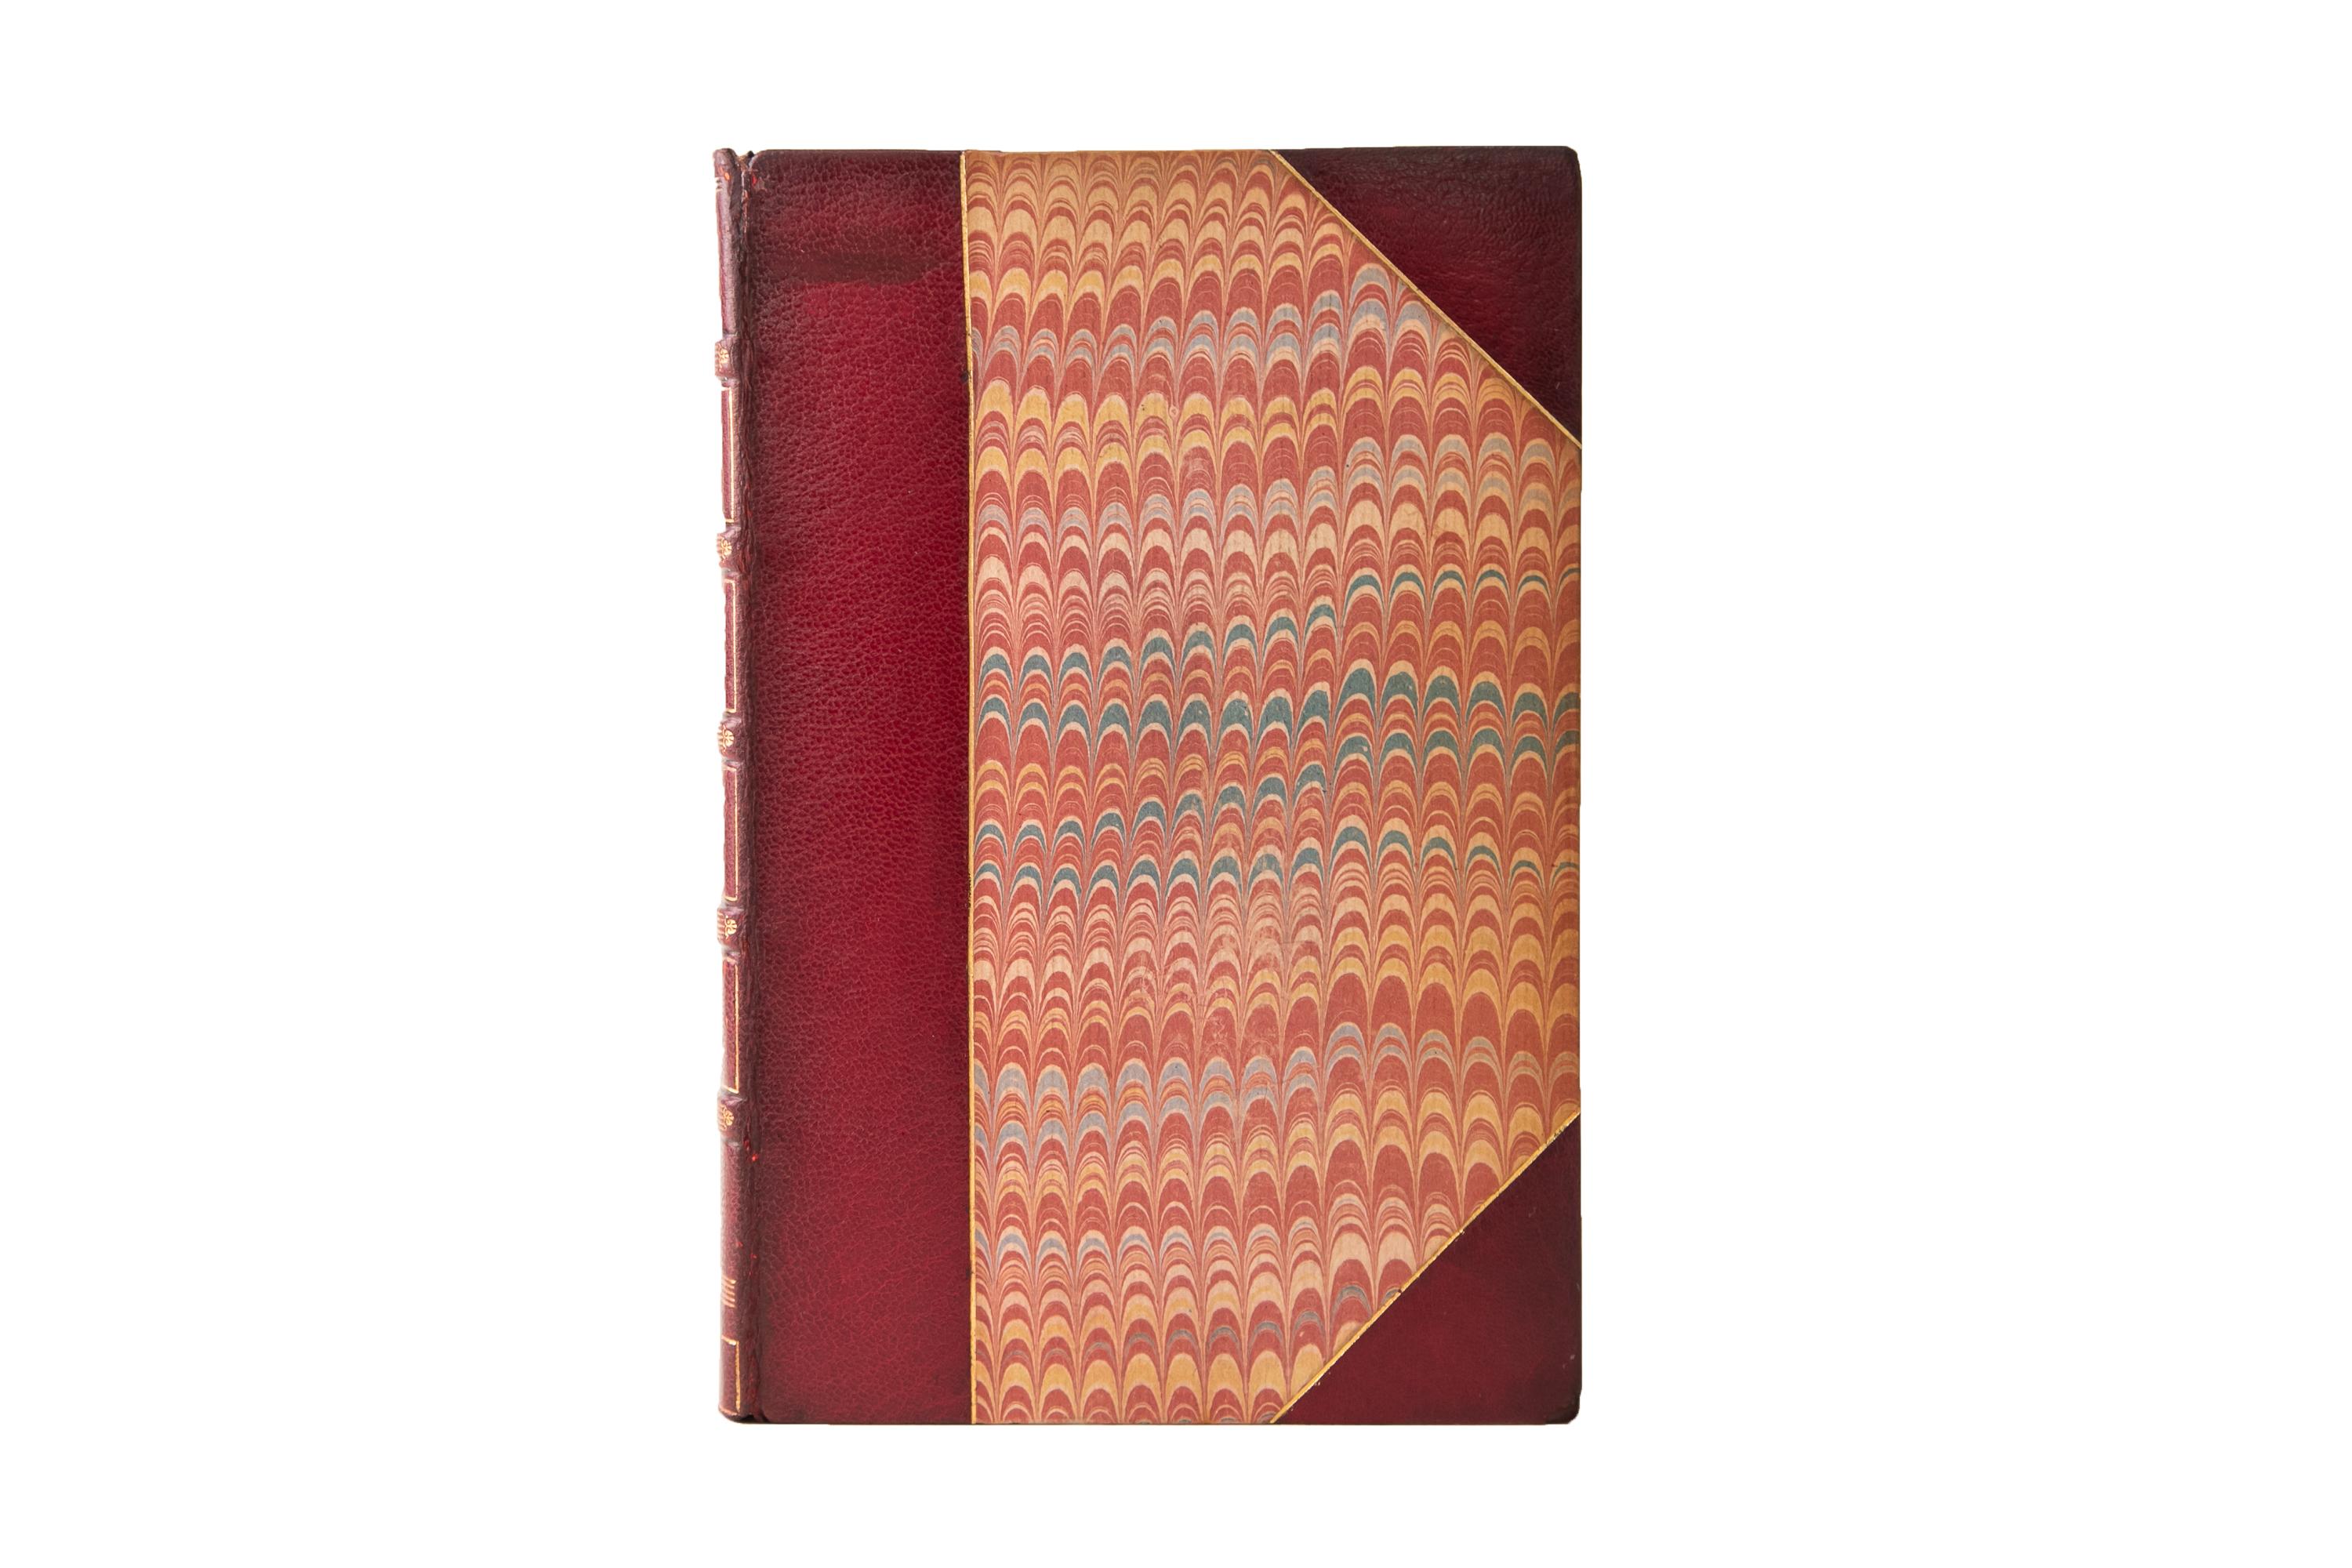 8 Volumes. Robert Burns, Collected Poetry. Extra Illustrated Edition. Bound by Zaehnsdorf in 3/4 red morocco and marbled boards bordered in gilt tooling. The spines display raised bands, bordering, label lettering, and crest panel detailing. The top